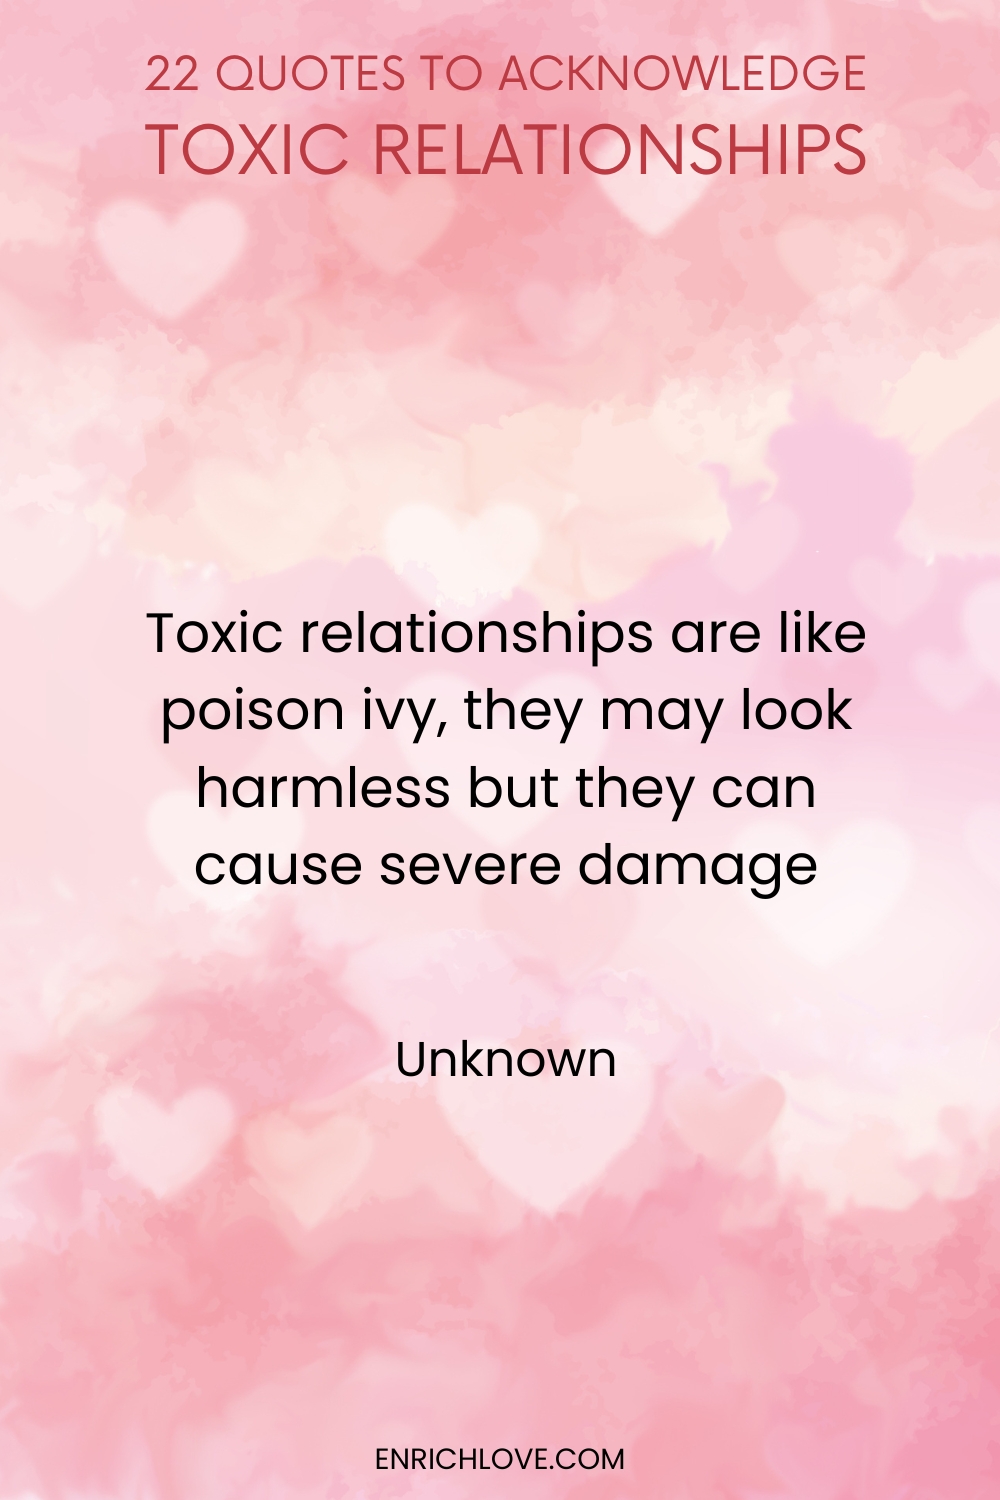 22 Quotes to Acknowledge Toxic Relationships -Toxic relationships are like poison ivy, they may look harmless but they can cause severe damage by Unknown